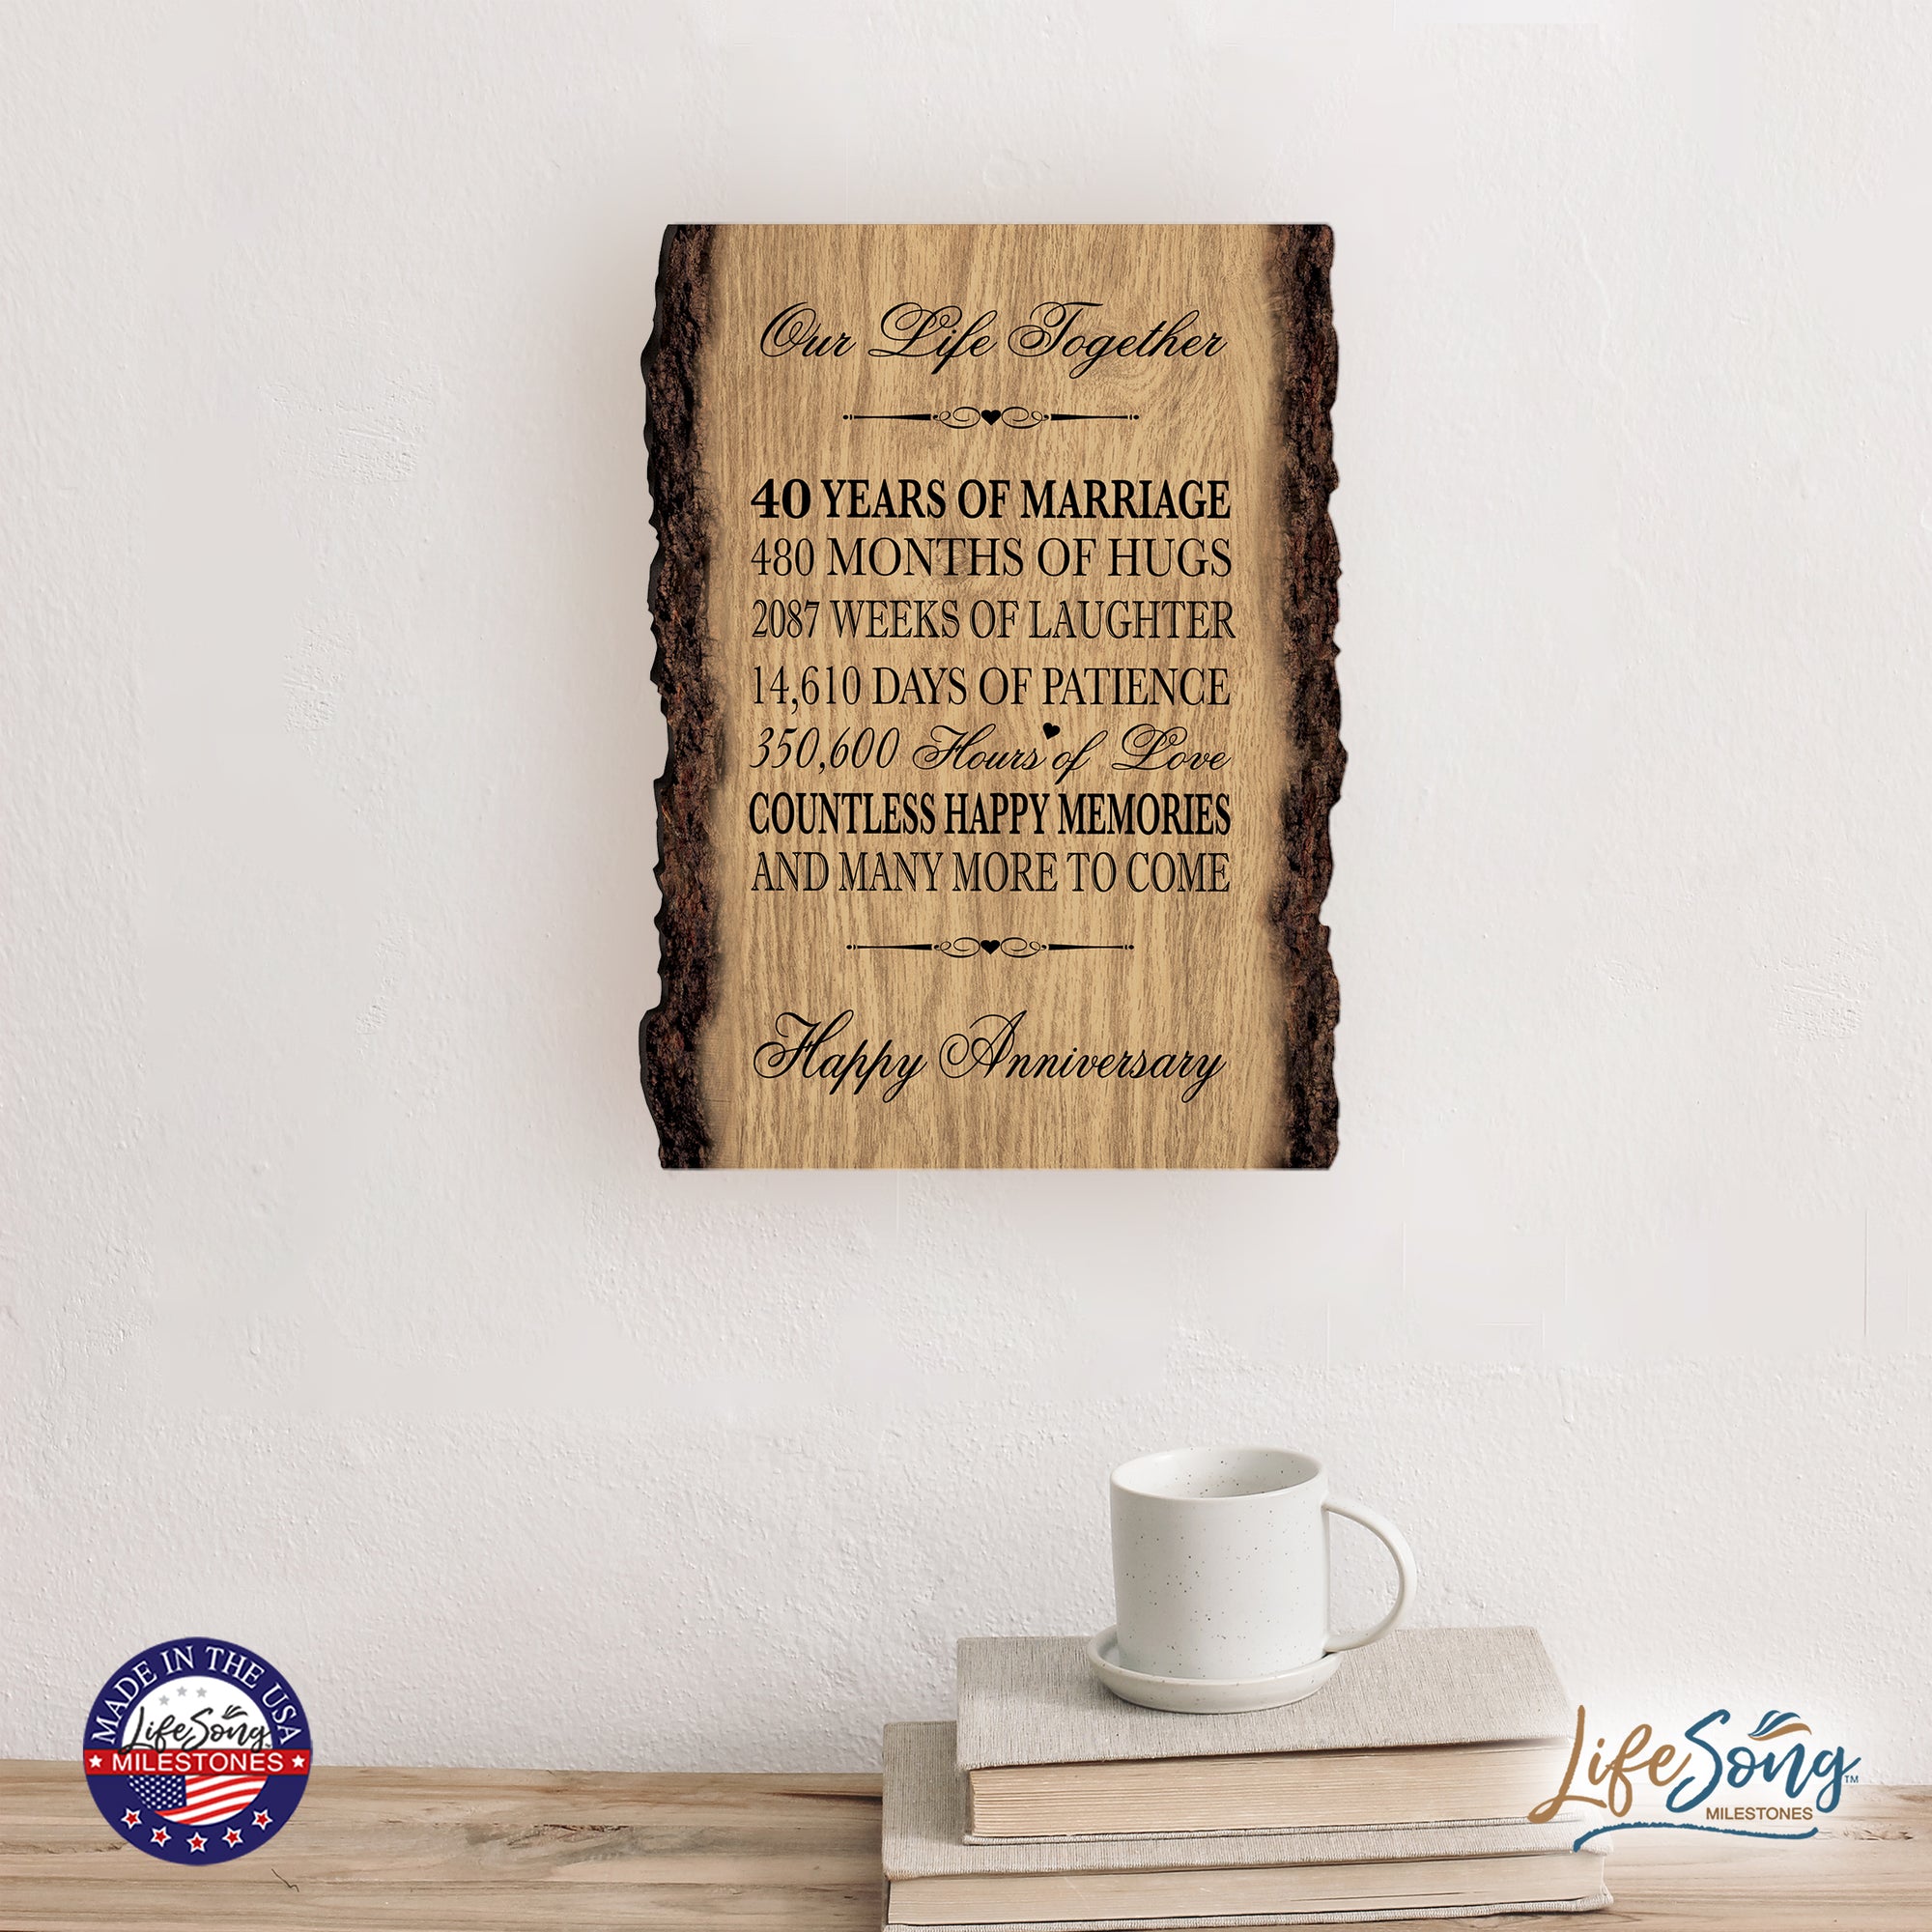 Rustic Wedding Anniversary 9x12 Barky Wall Plaque Gift For Parents, Grandparents New Couple - 40 Years Of Marriage